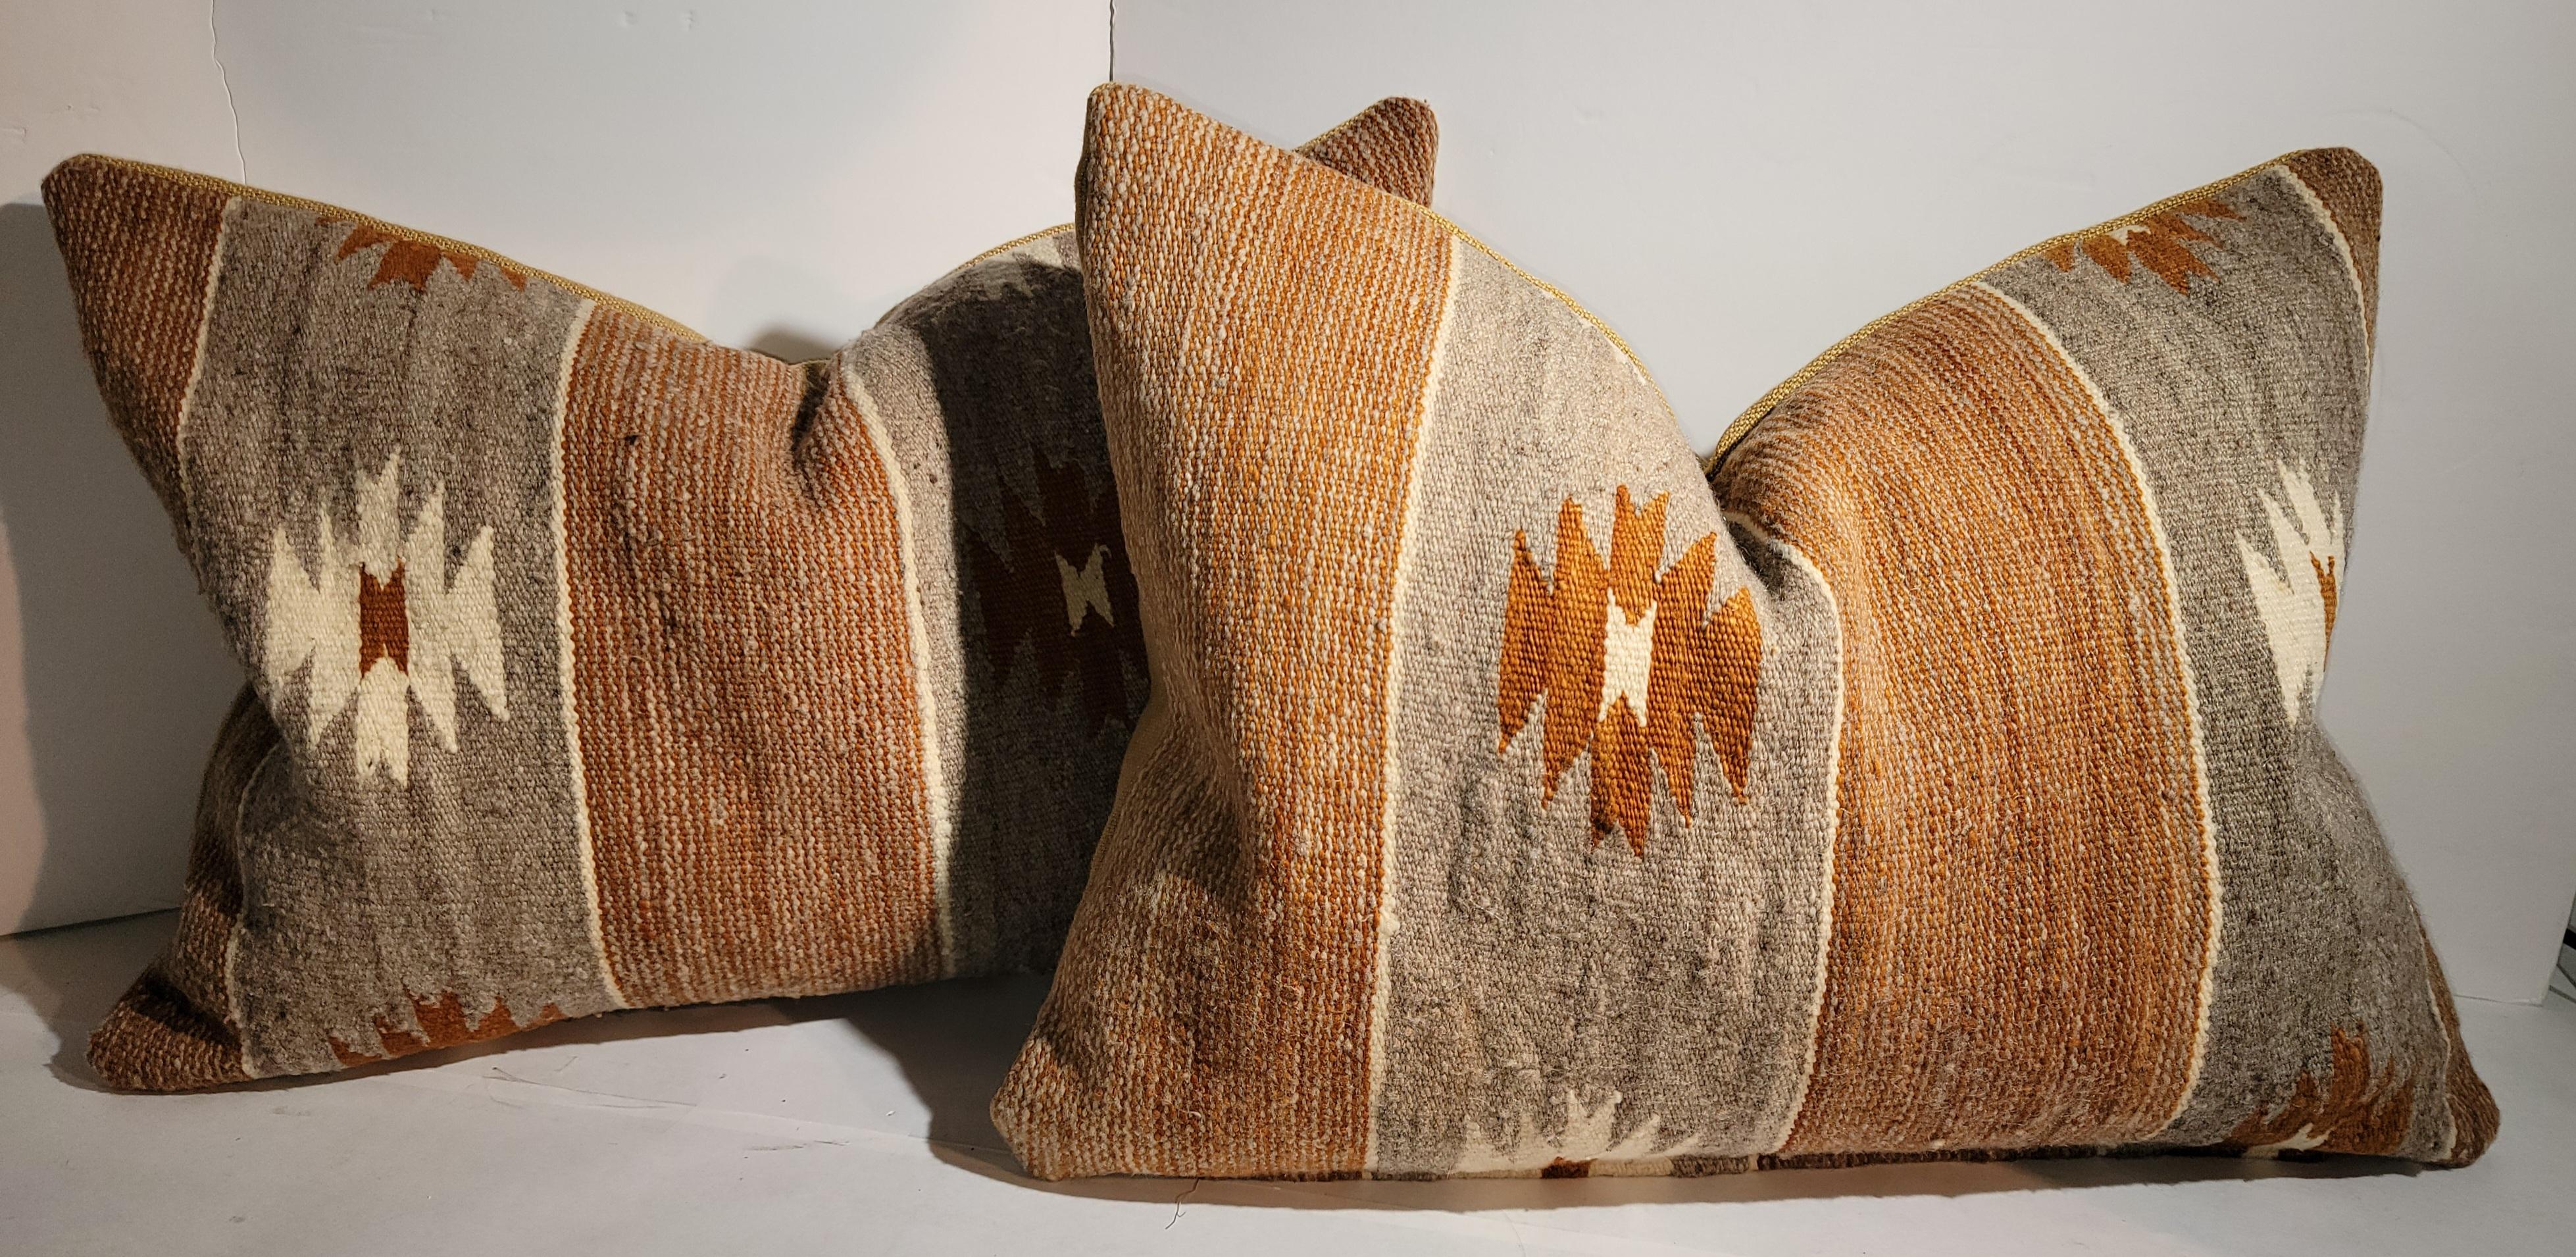 20Thc Navajo Indian weaving bolster pillow or pillows. These Chinle Navajo Indian weaving pillows.Sold individually or as a set of four.